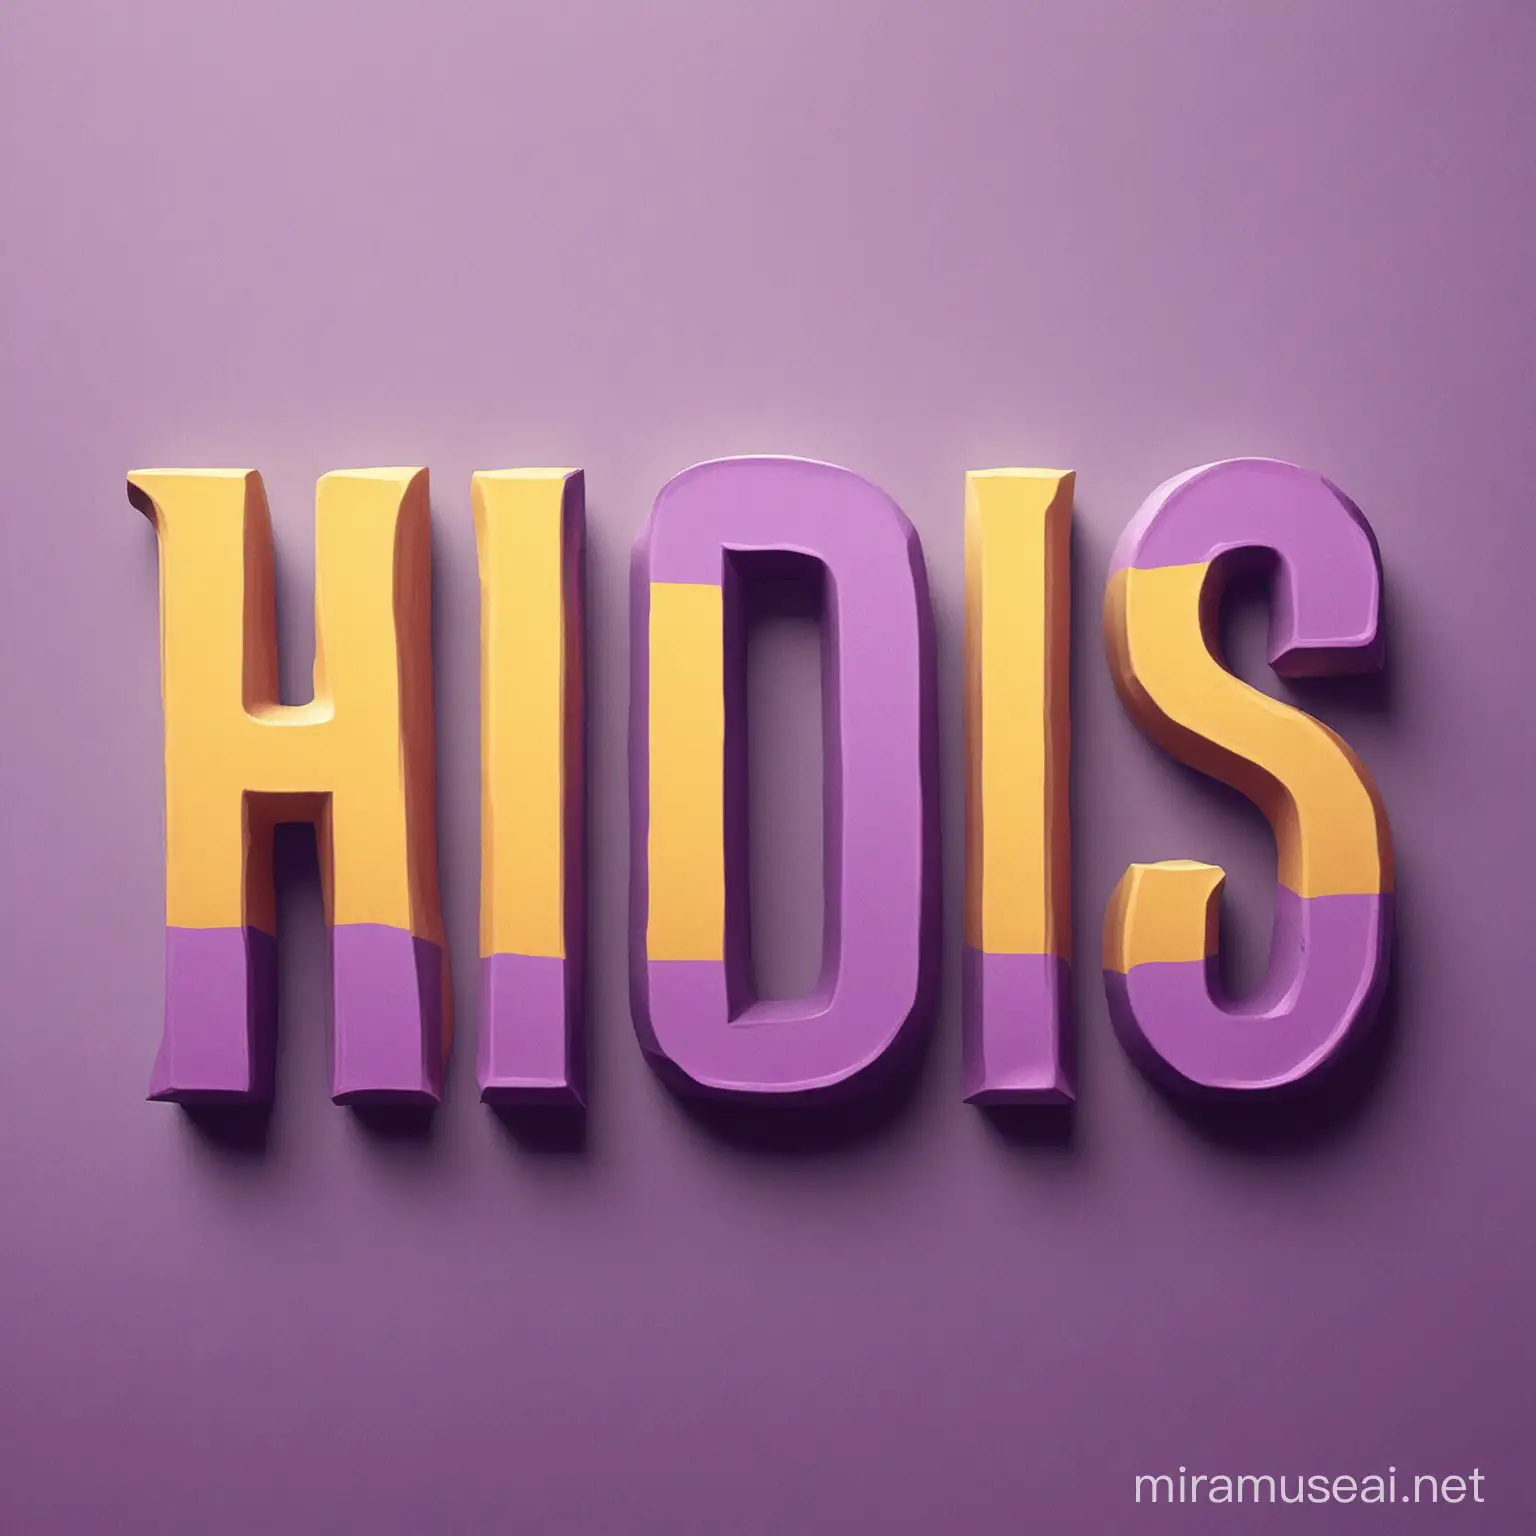 Humorous Blog Logo Vibrant HChS Letters in Purple and Yellow